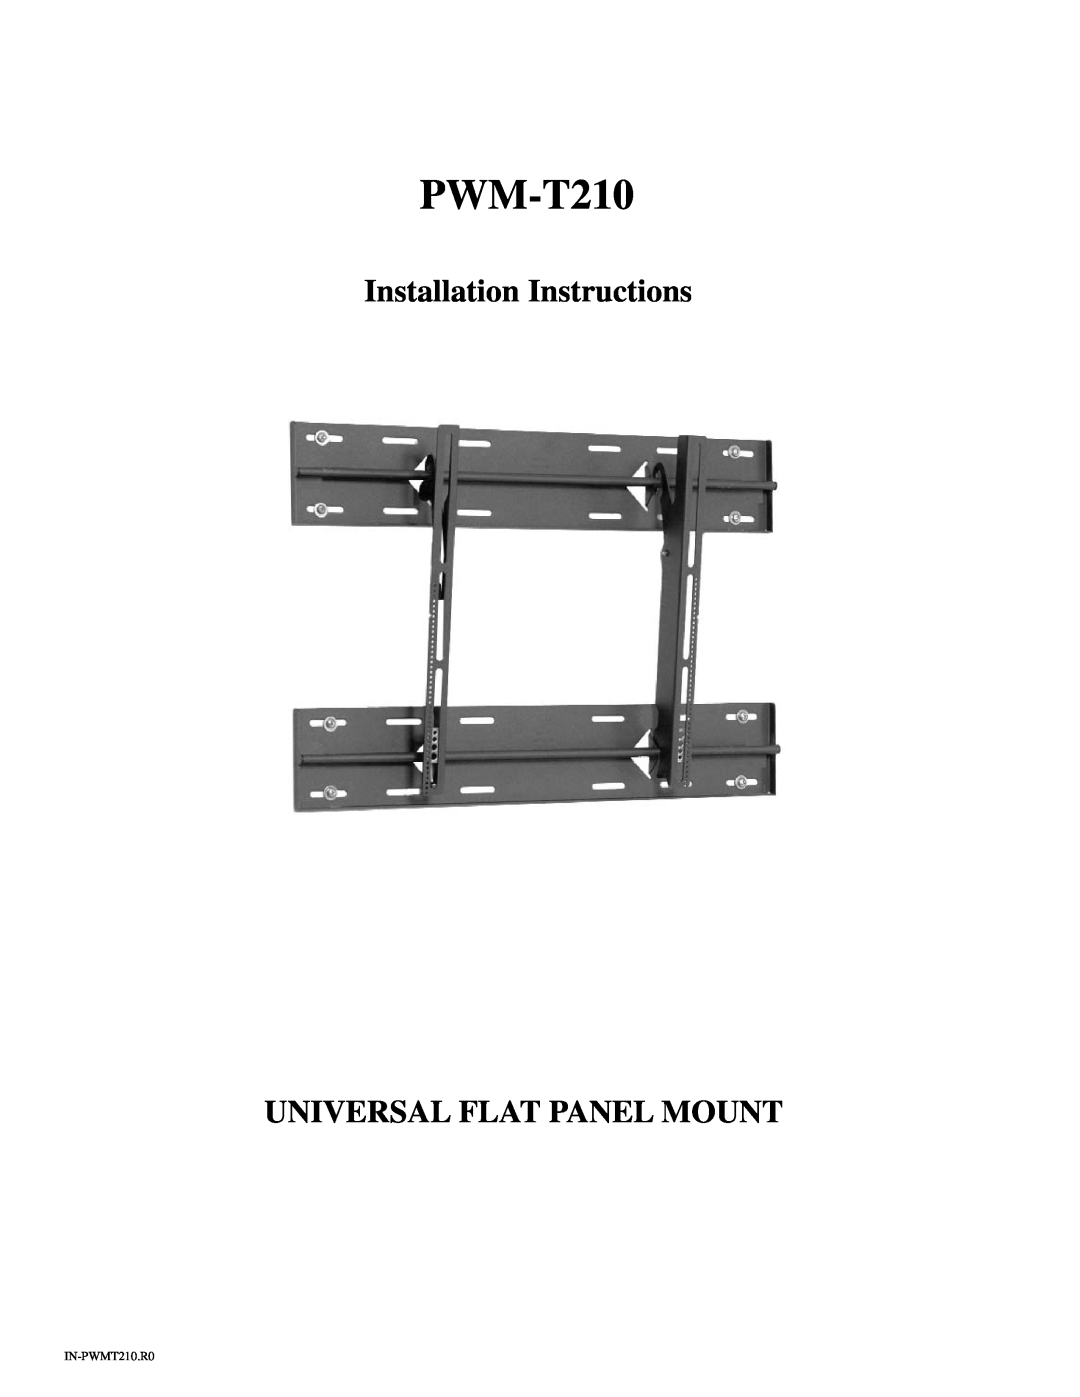 Pioneer PWM-T210 installation instructions Installation Instructions, Universal Flat Panel Mount, IN-PWMT210.R0 